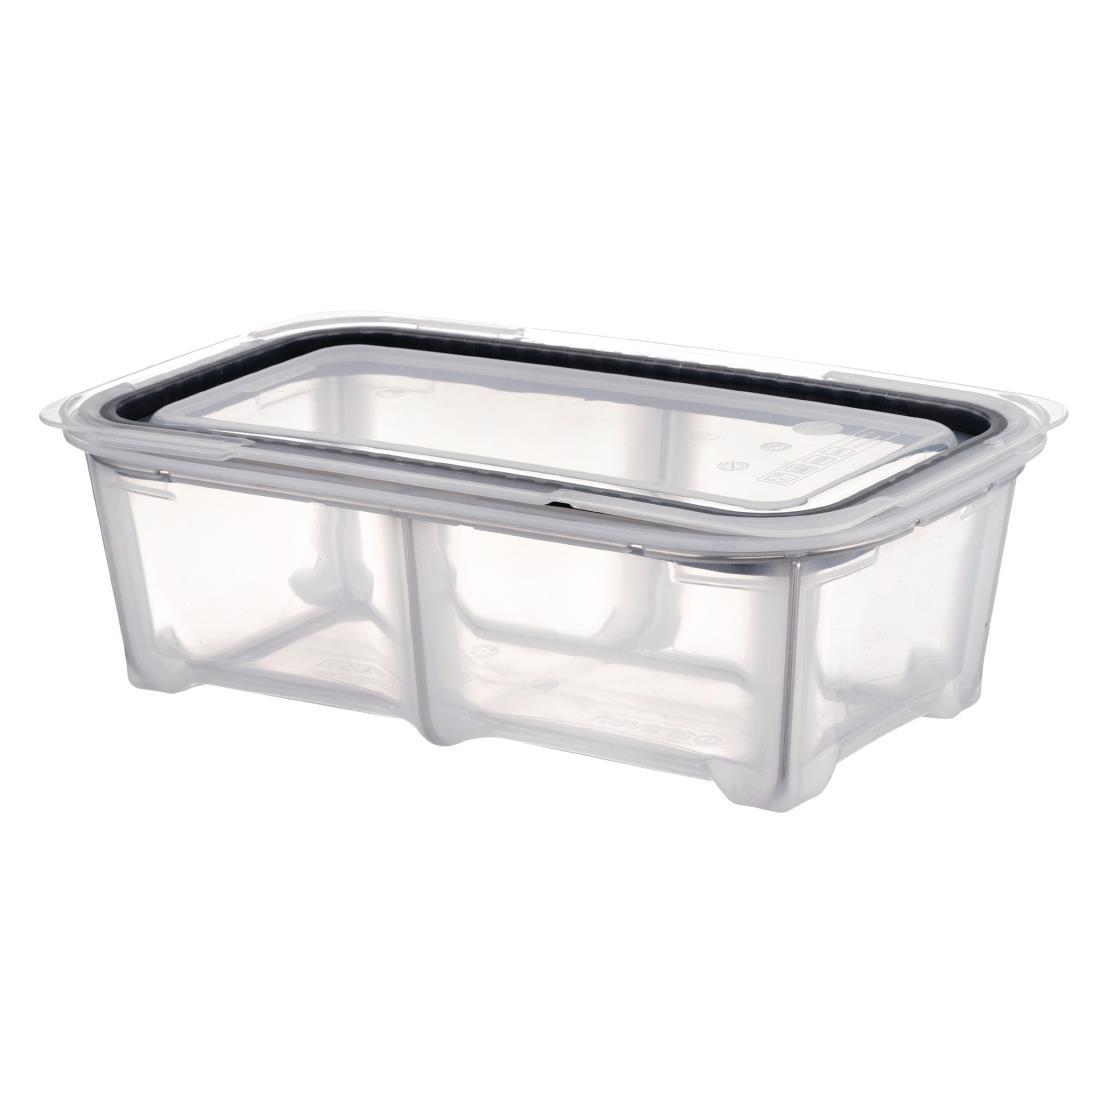 Araven Silicone 1/3 Gastronorm Food Container 4Ltr - CM780  - 1